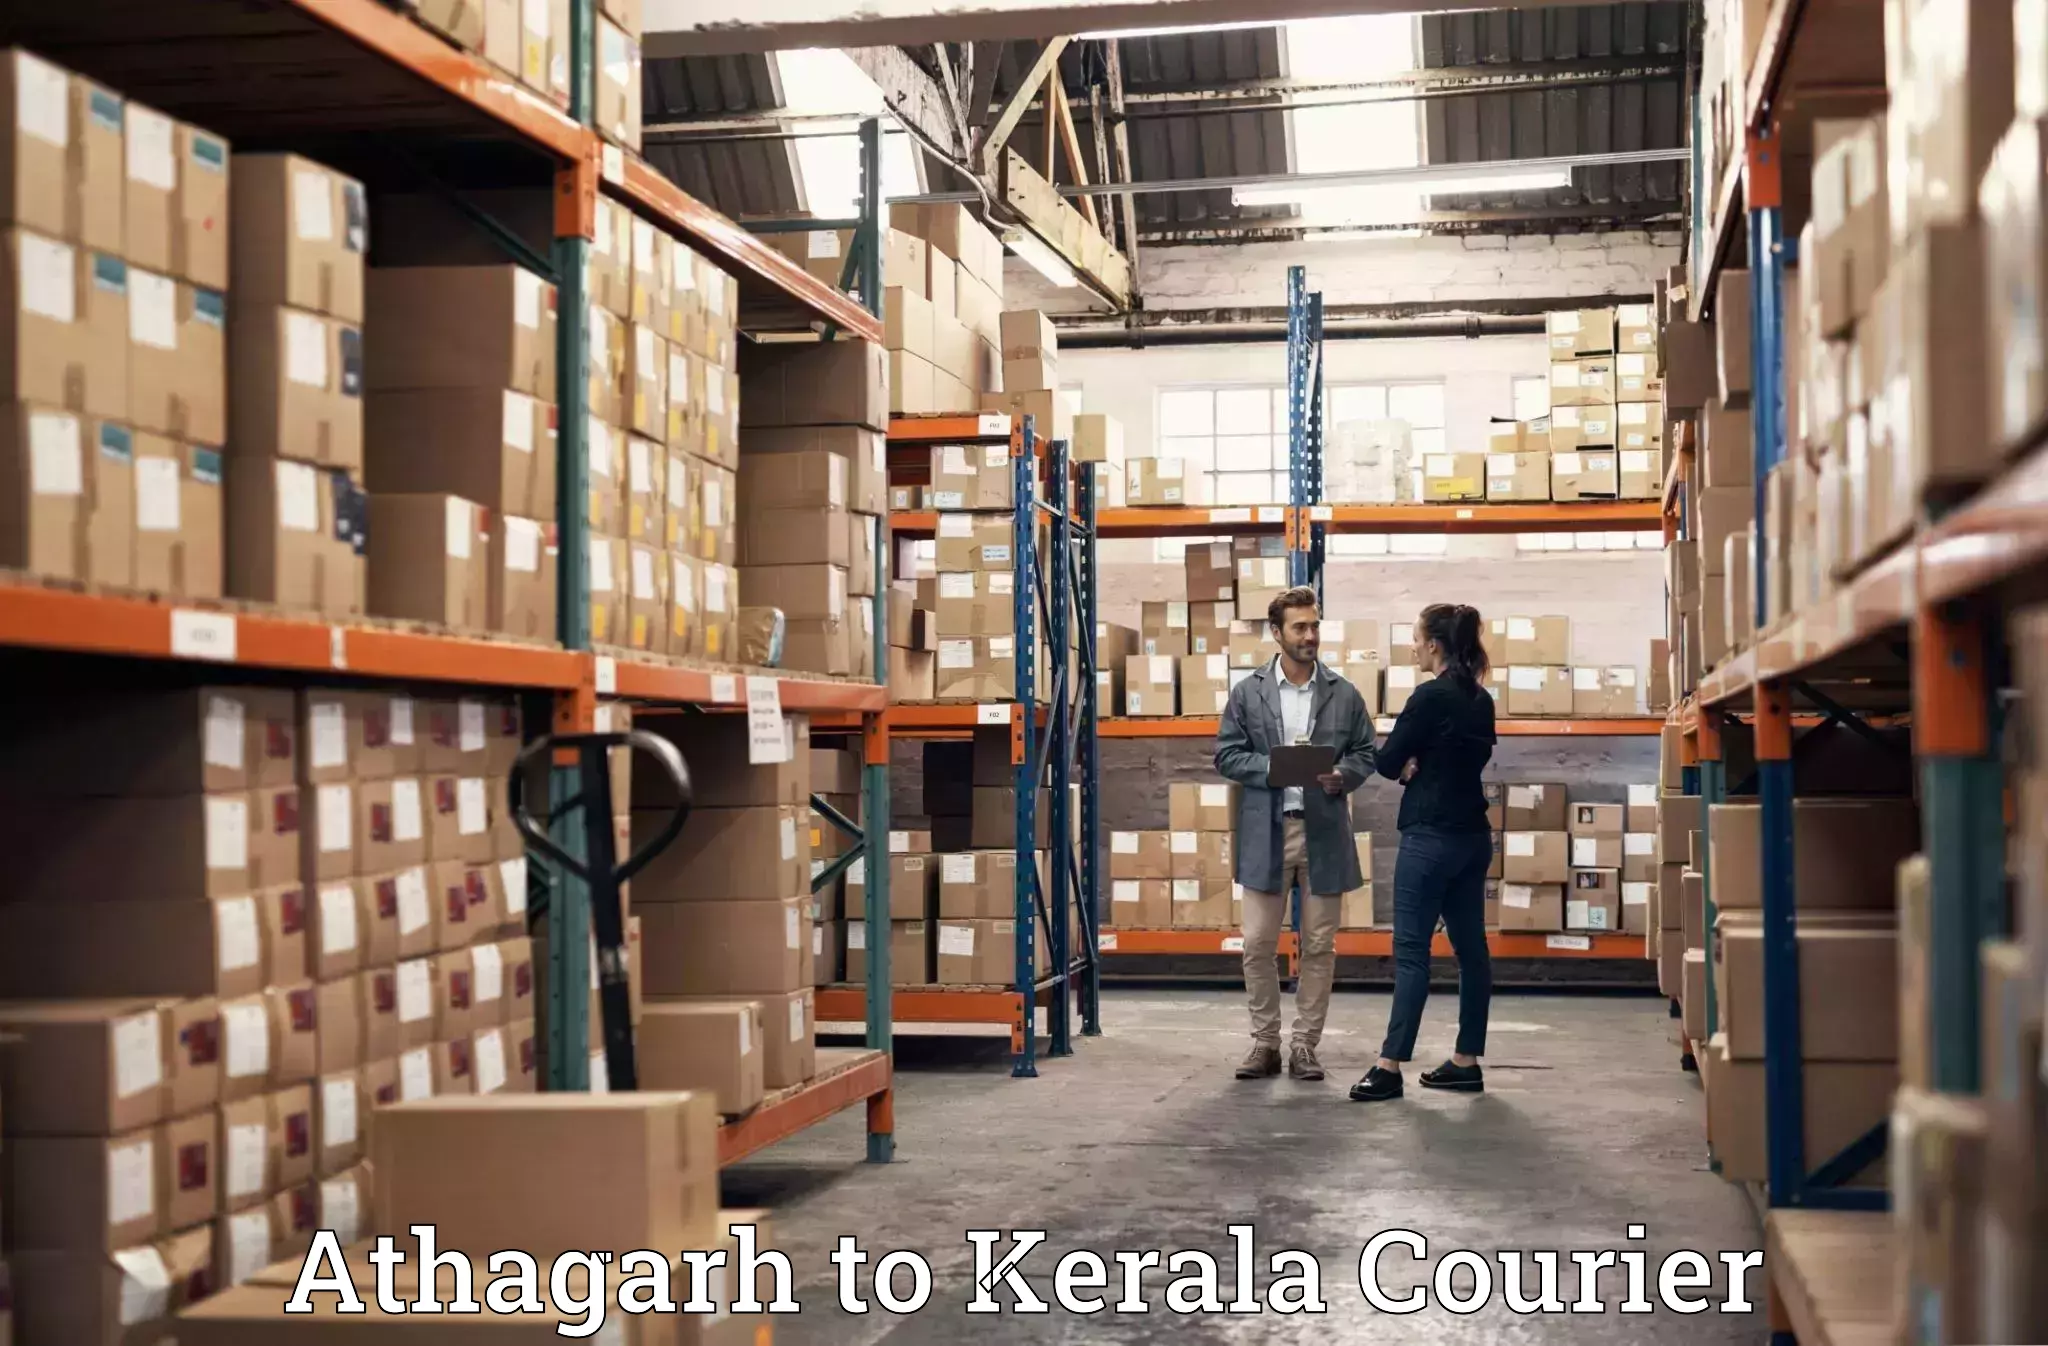 Furniture relocation experts Athagarh to Kollam